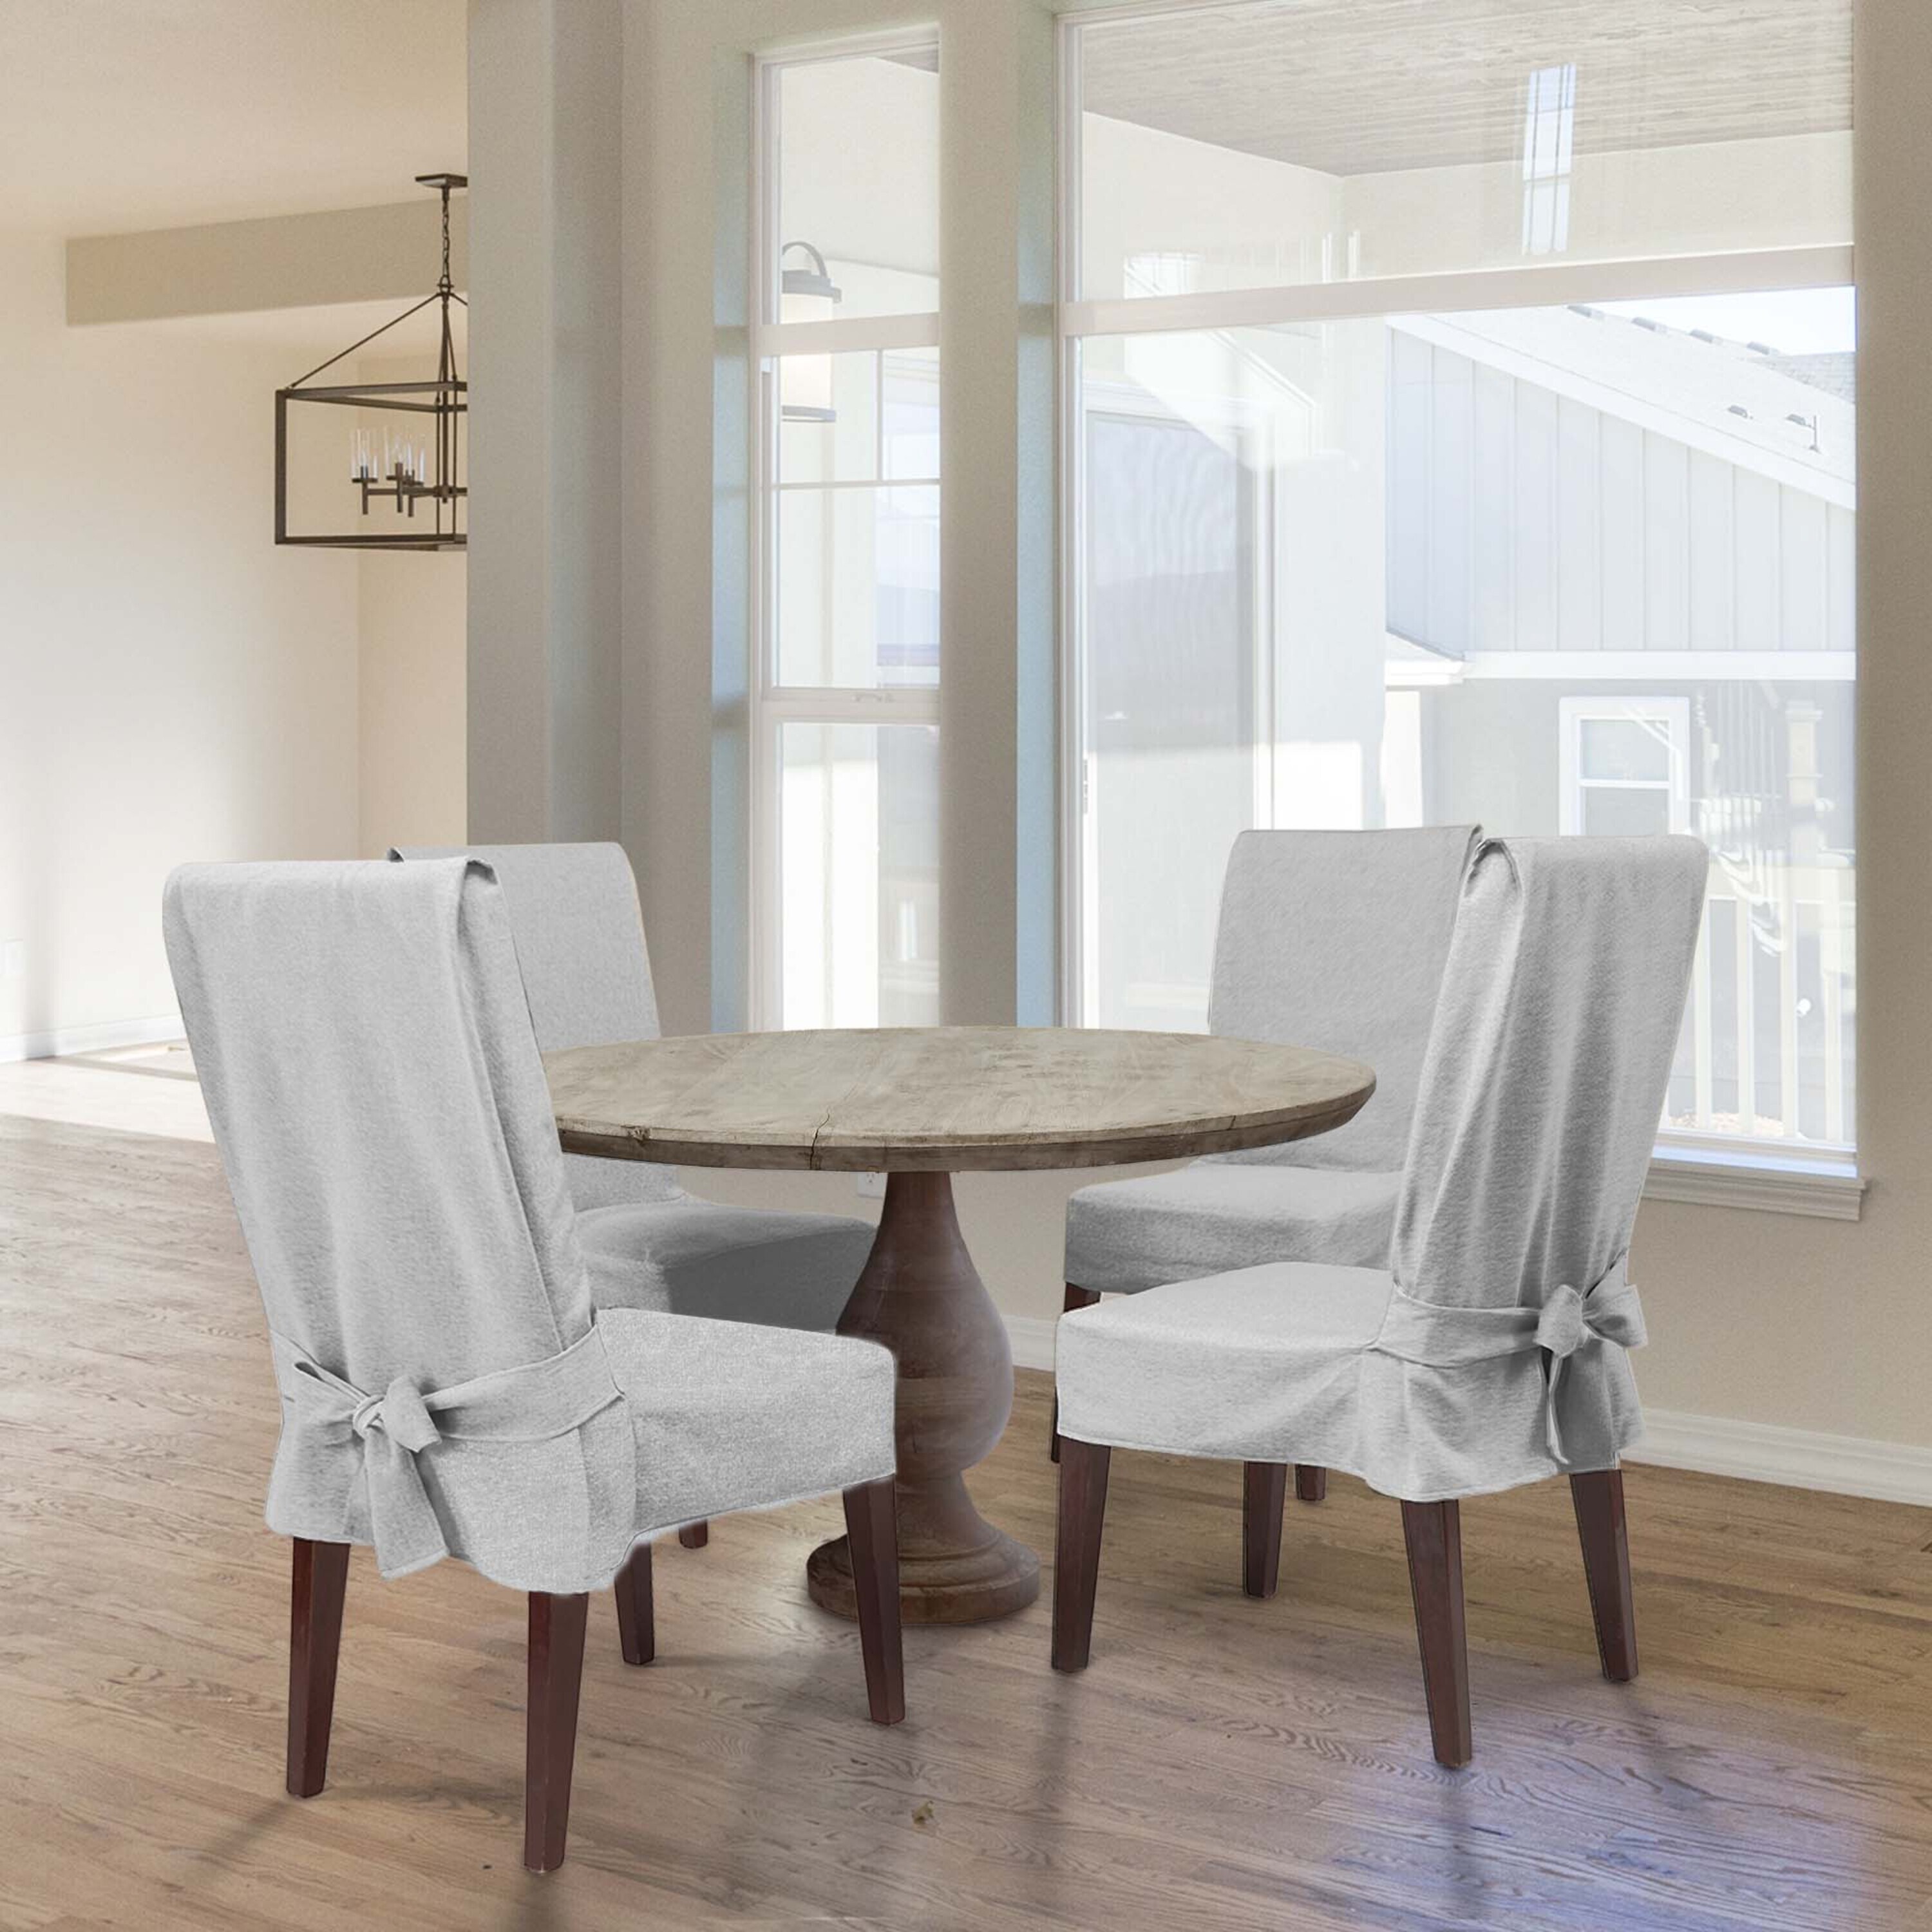 https://ak1.ostkcdn.com/images/products/is/images/direct/70b363b021a4cf939daea8d55abe66aff445e846/SureFit-Farmhouse-Basketweave-Short-Dining-Chair-Slipcover.jpg